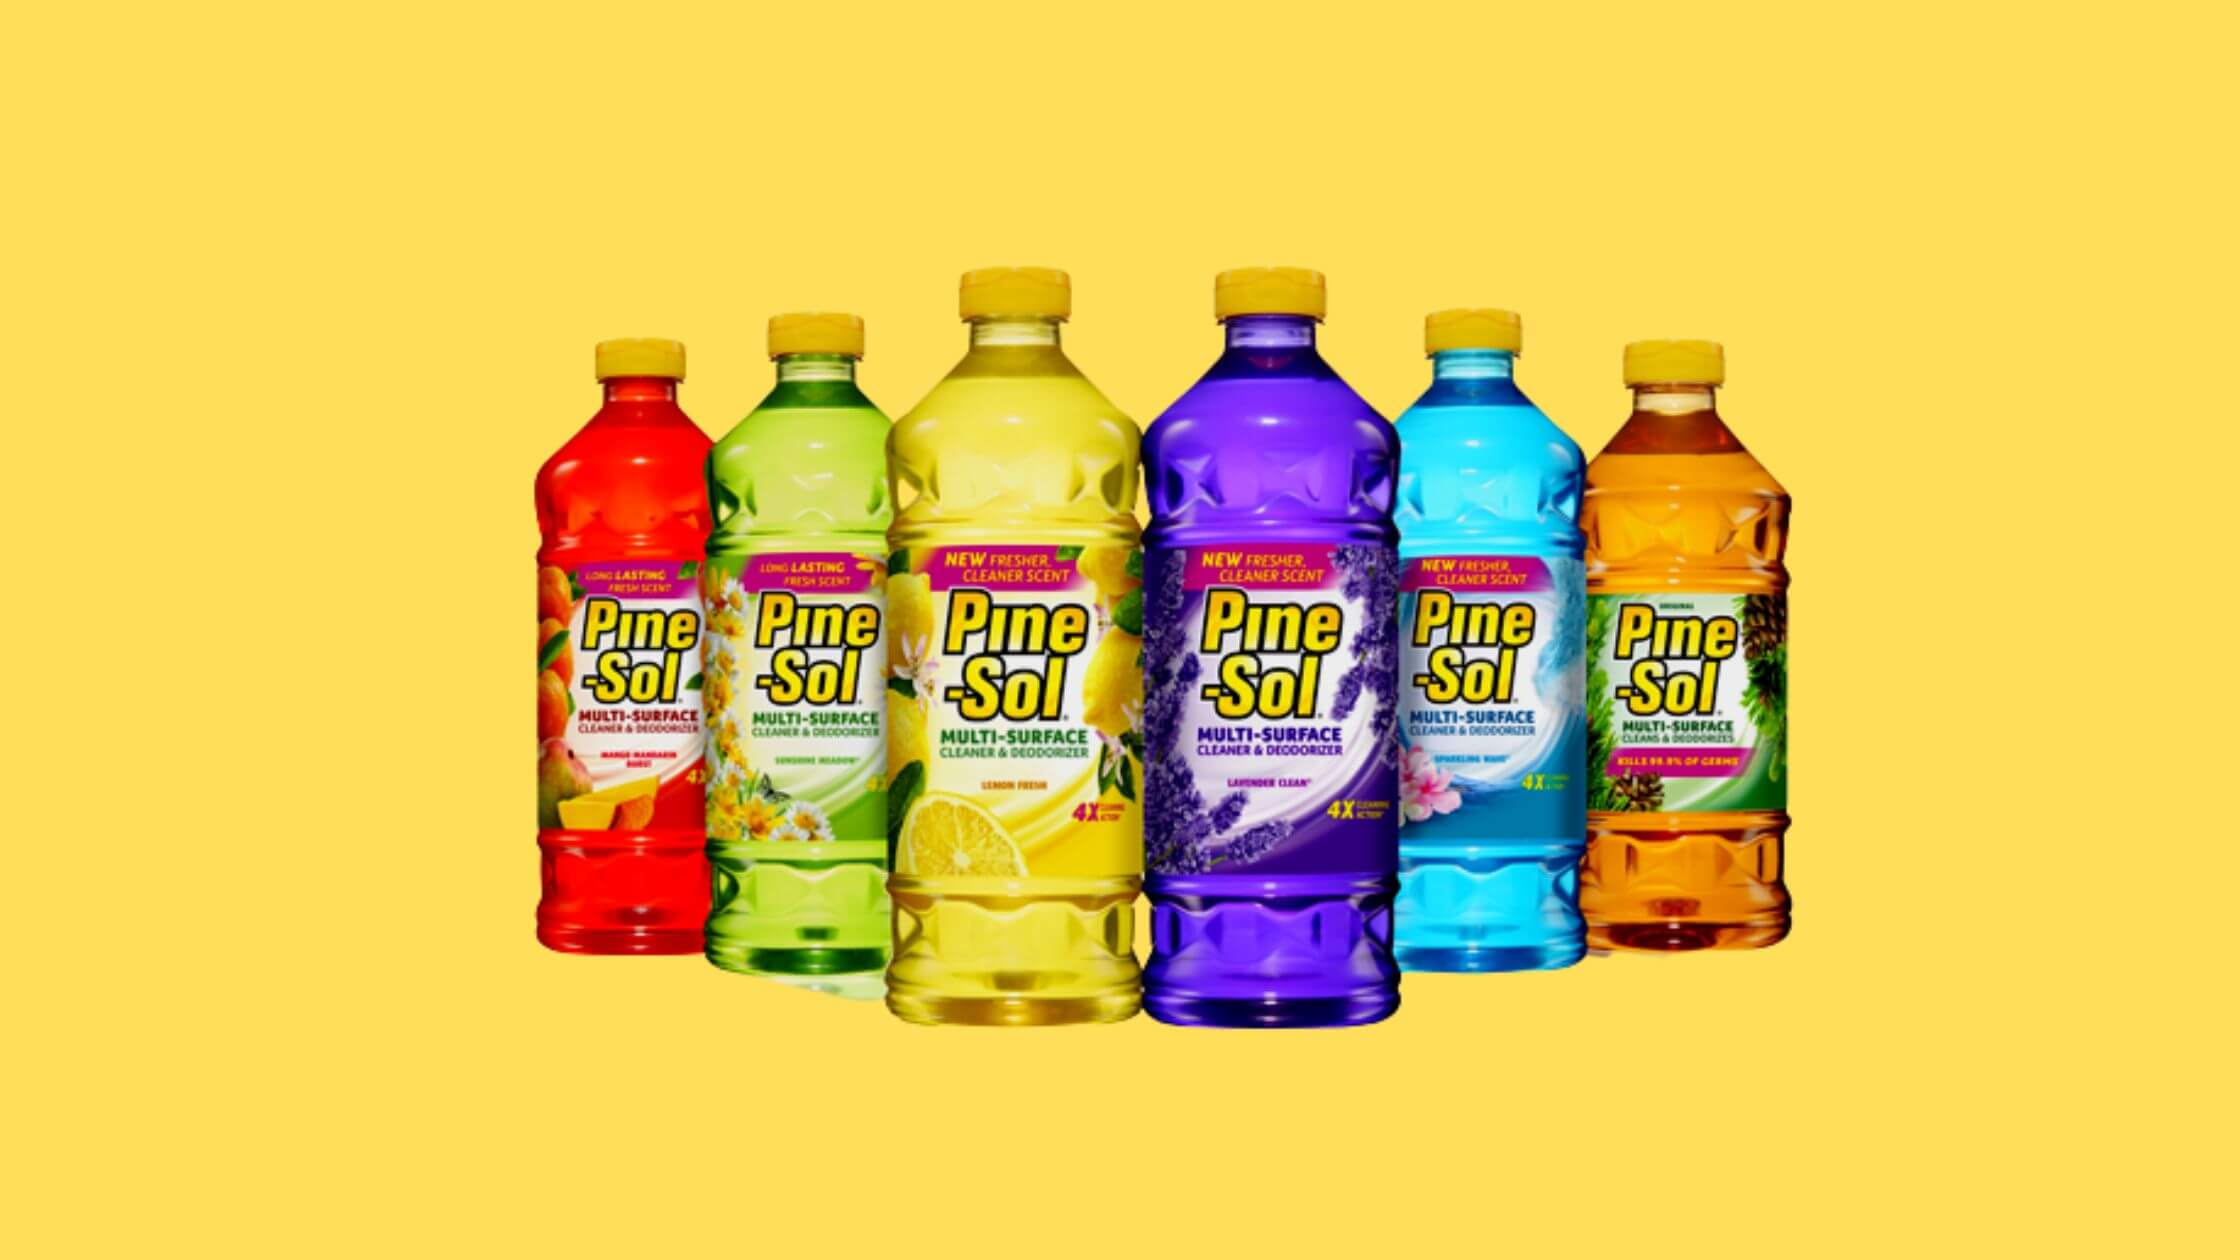 37 Million Bottles Of Pine-Sol Bottles Recalled By Clorox As Bacteria May Be Present